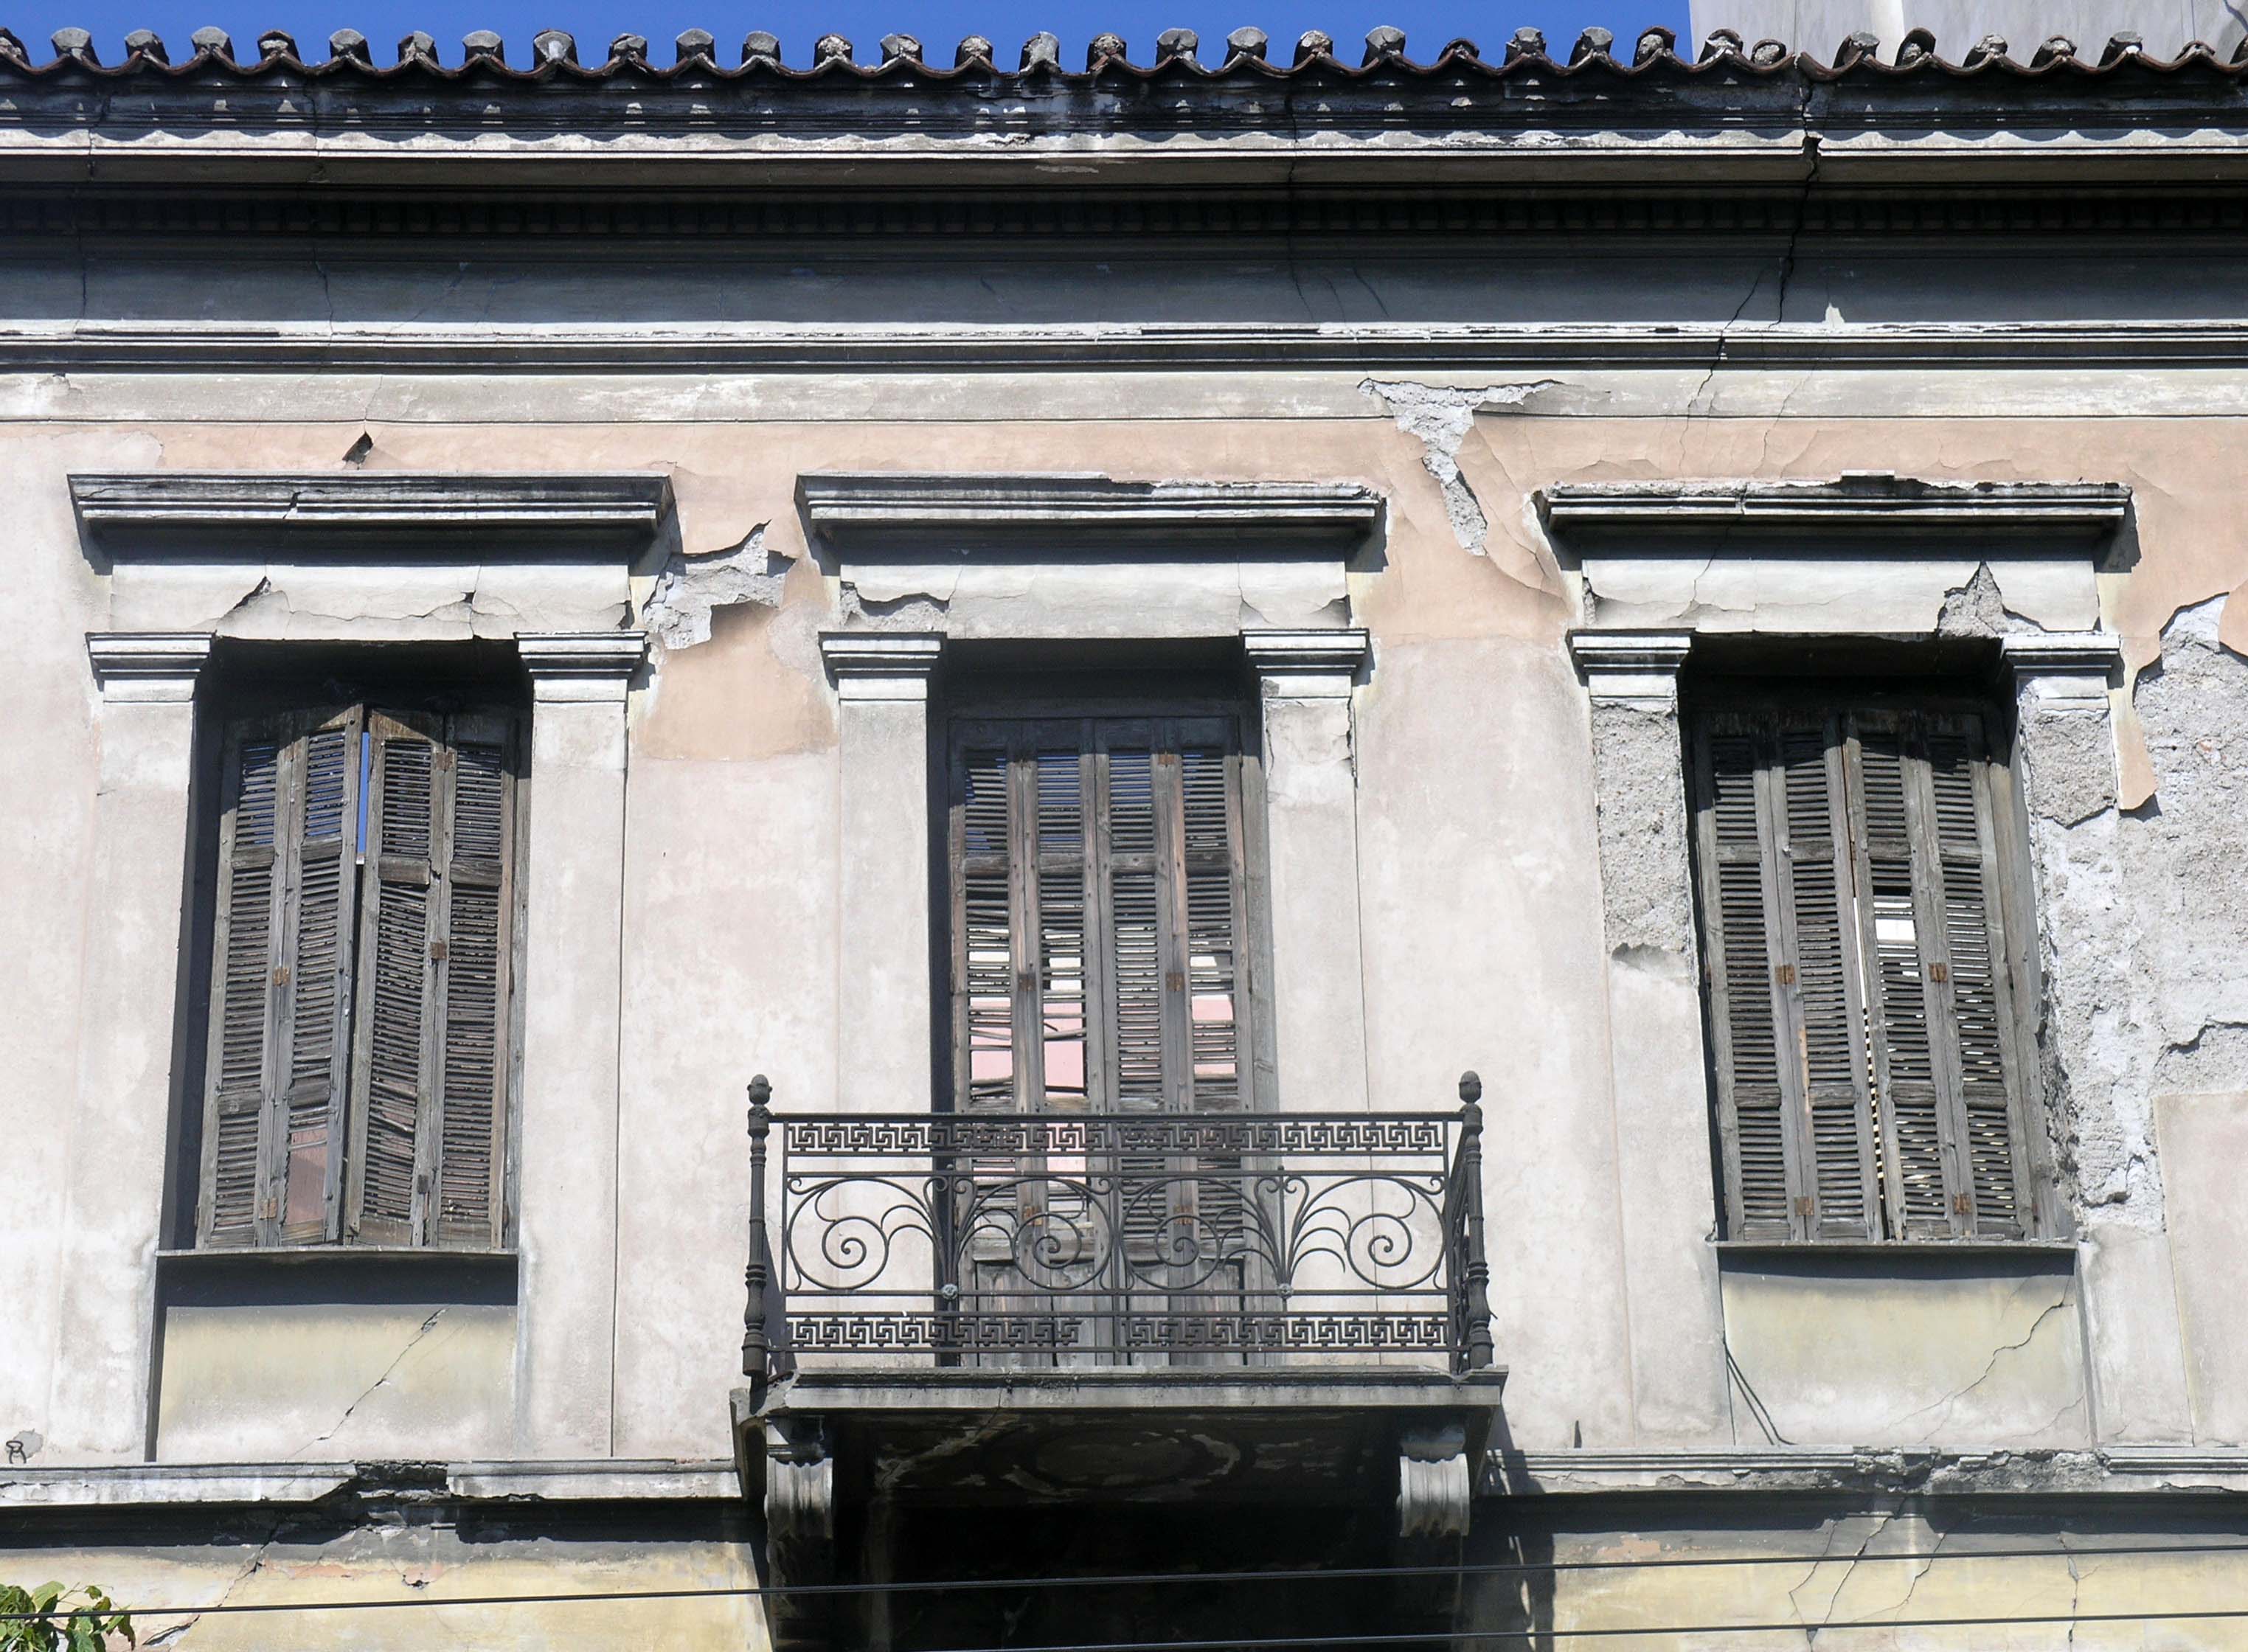 View of the windows and the balcony